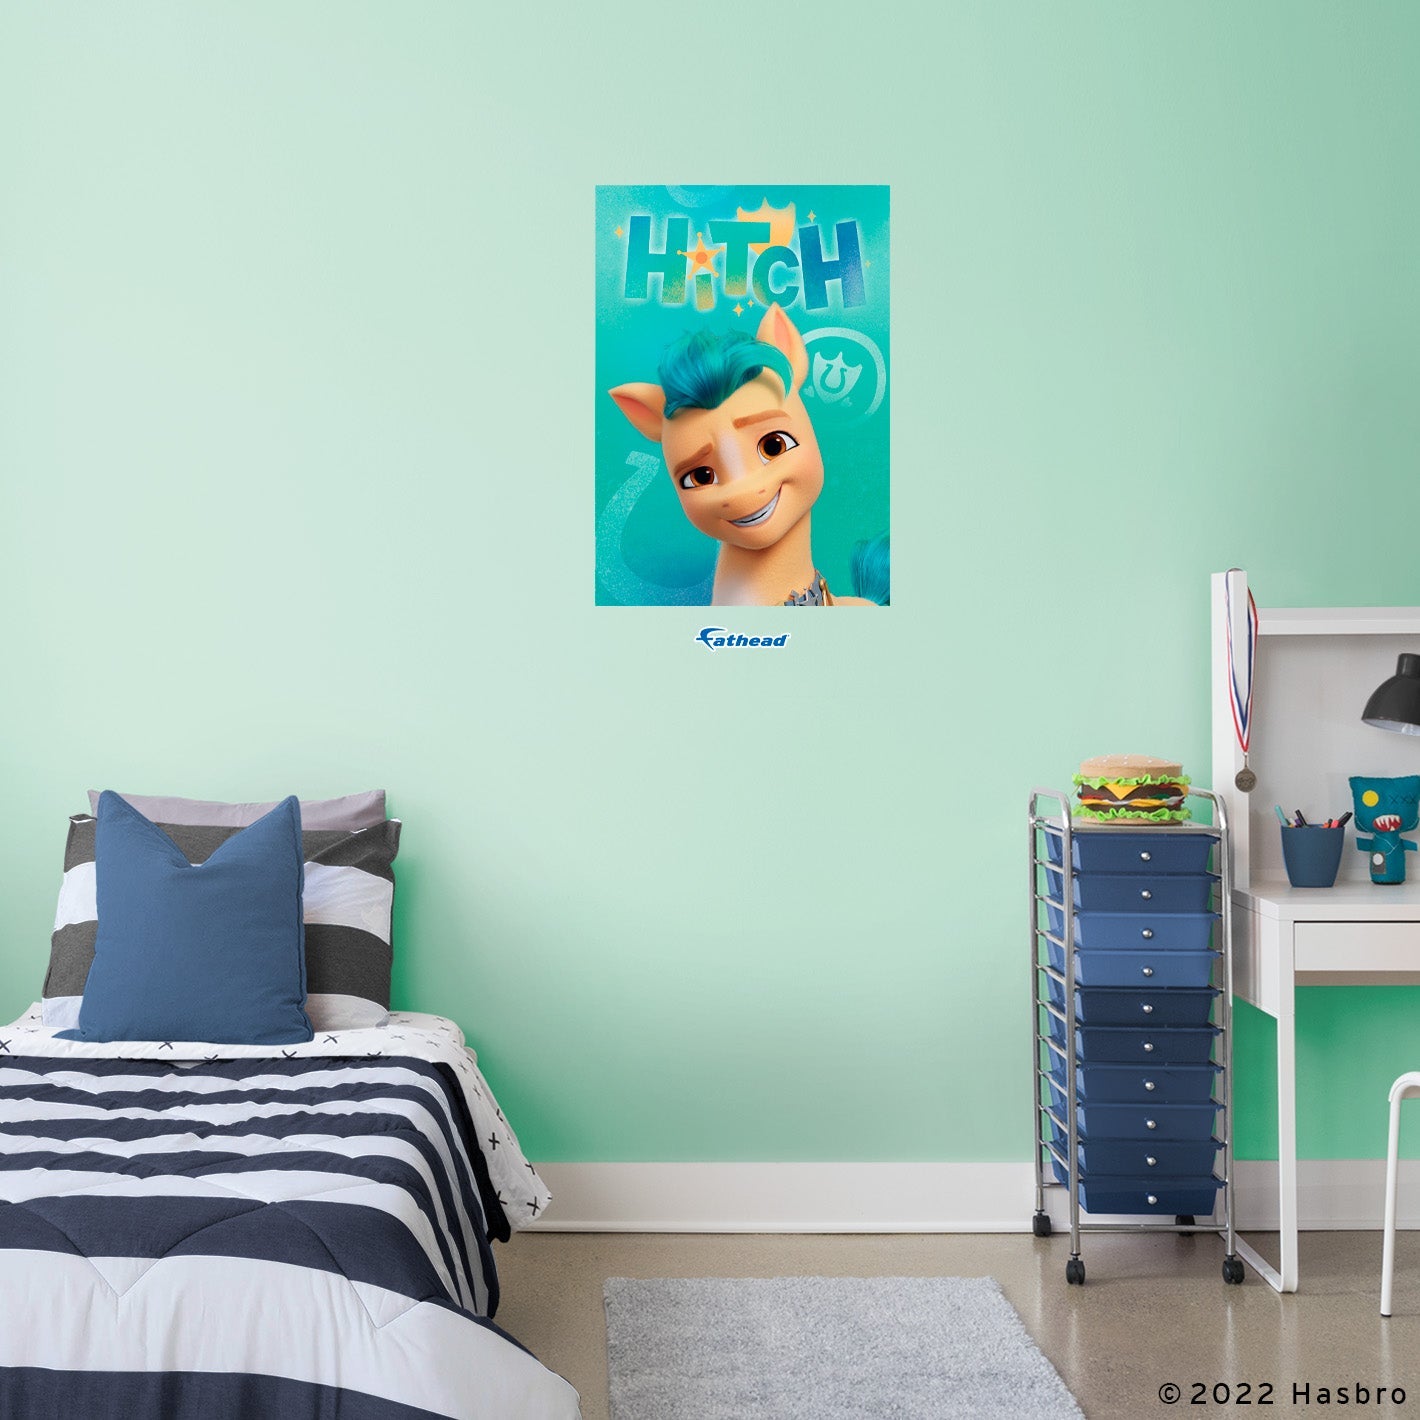 My Little Pony Movie 2: Hitch Poster - Officially Licensed Hasbro Removable Adhesive Decal